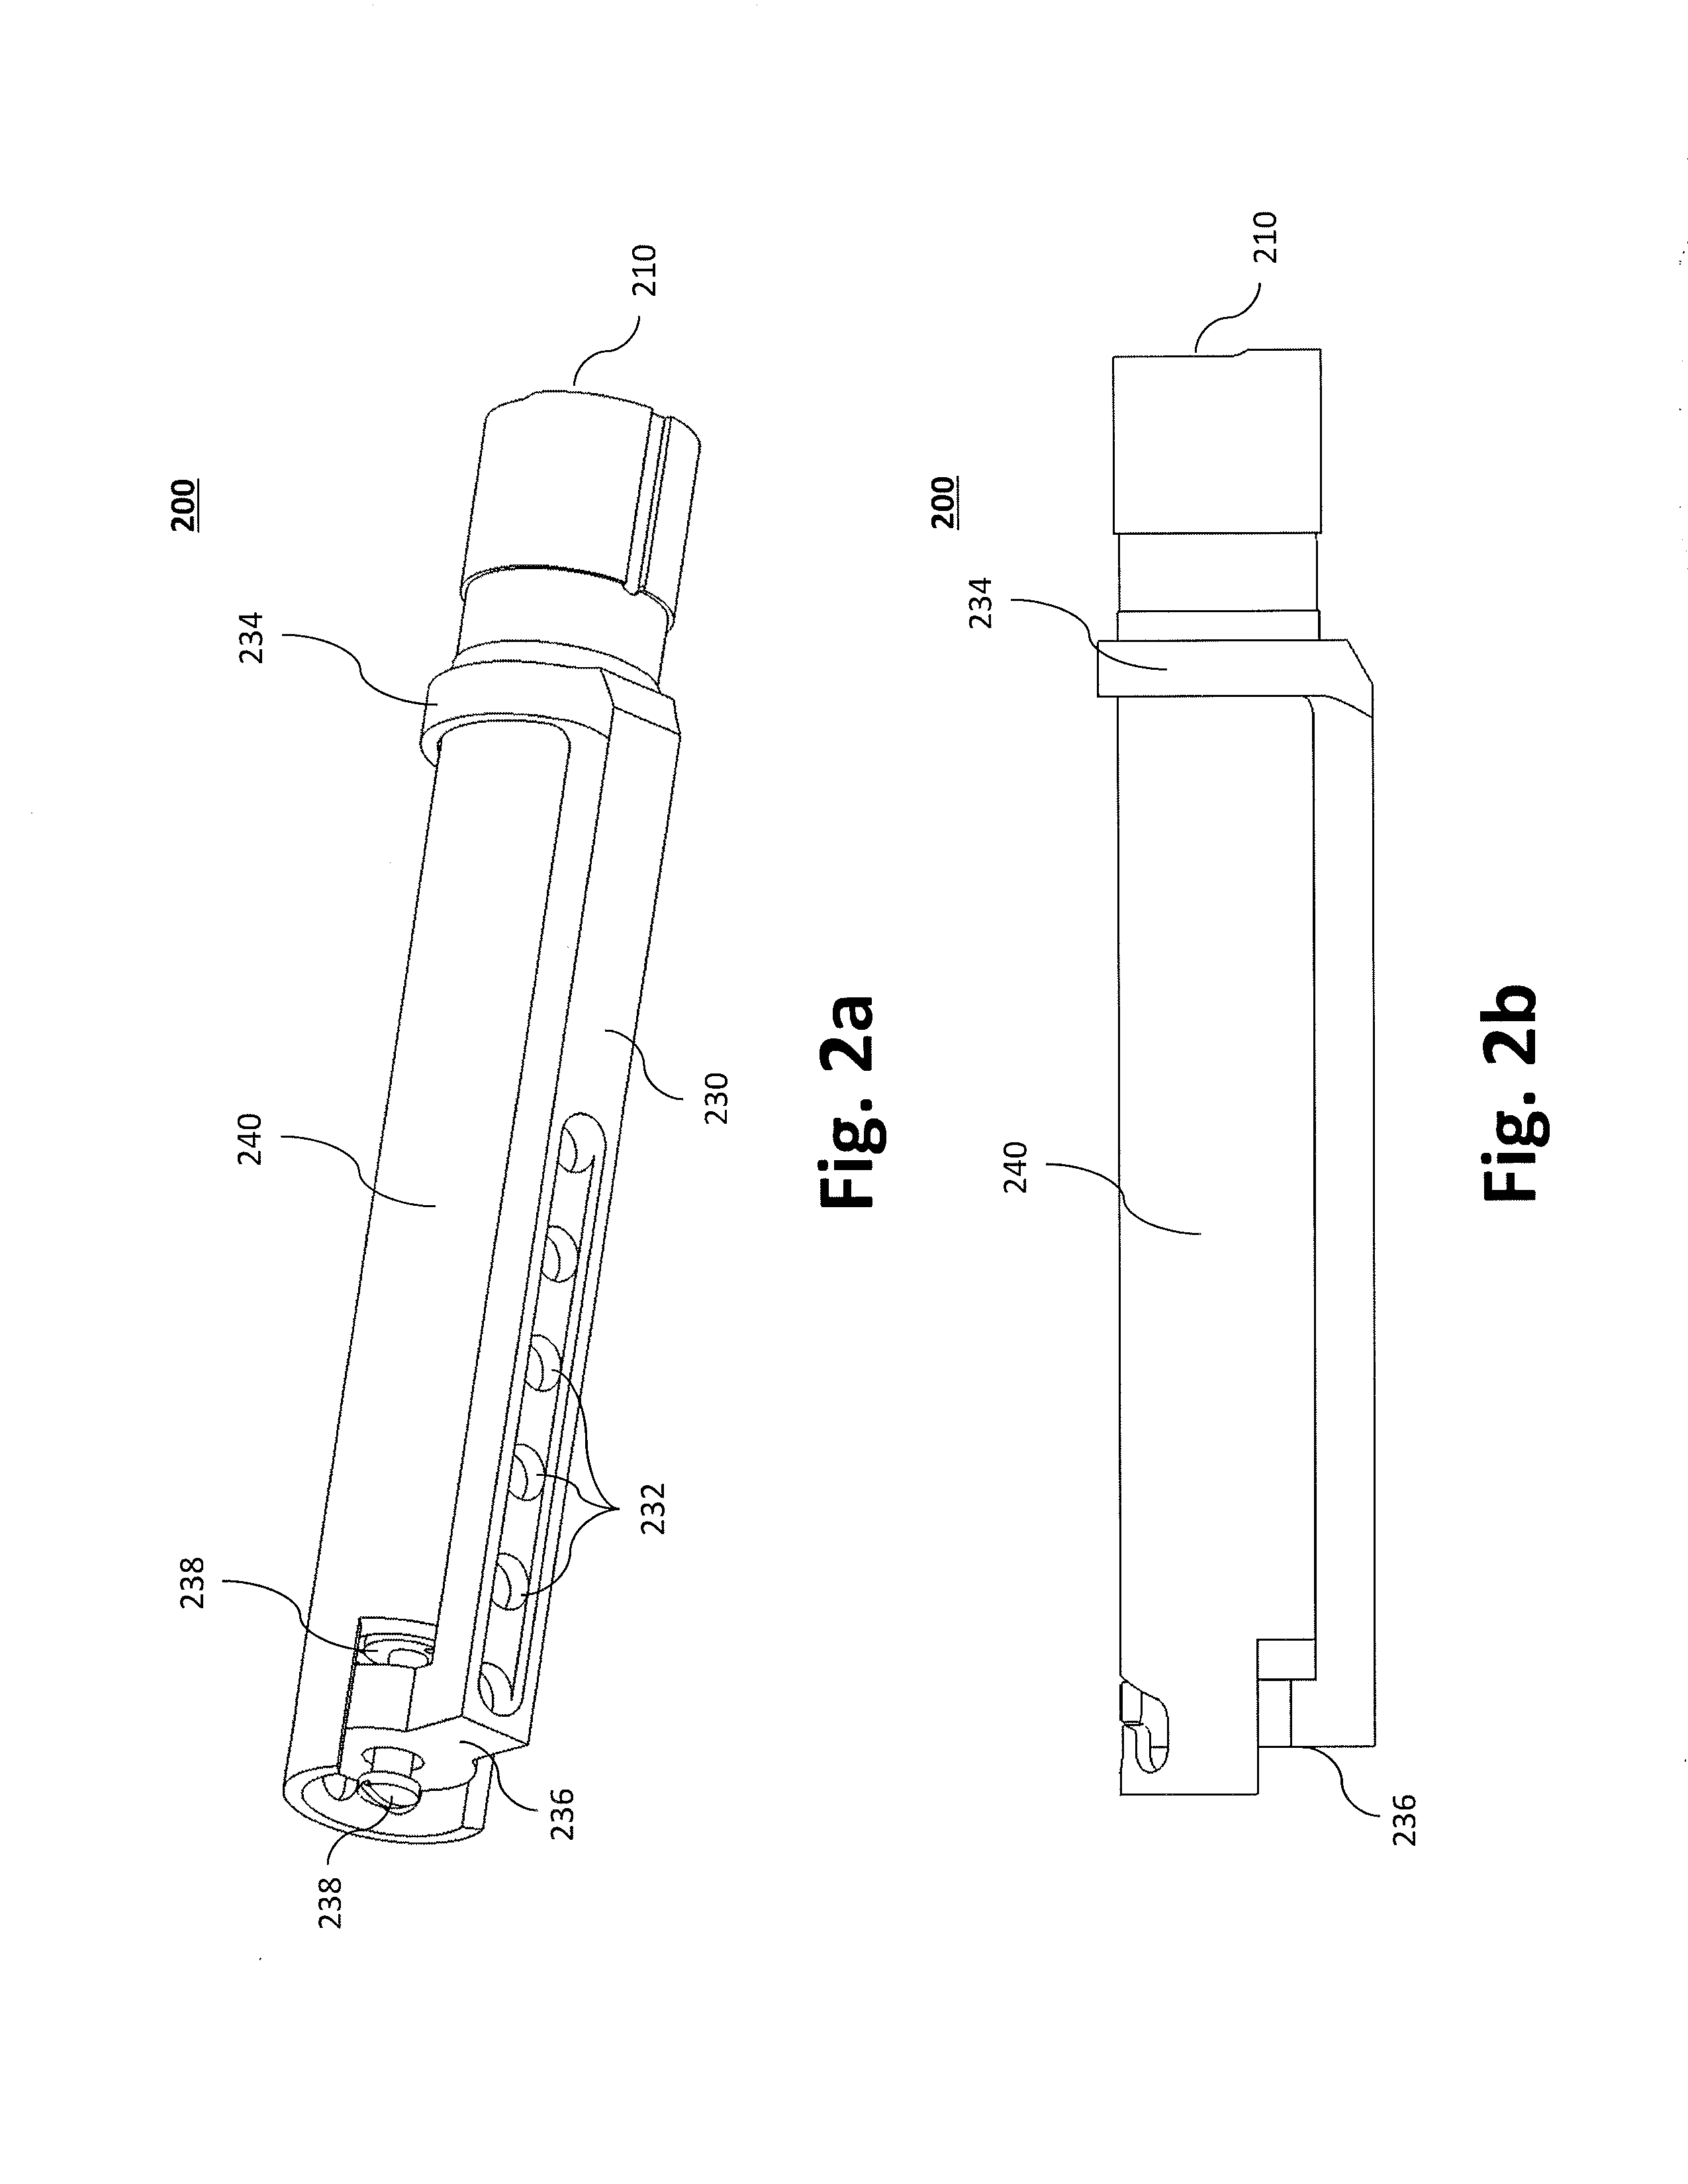 Recoil mitigation and buttstock floating system, method, and apparatus